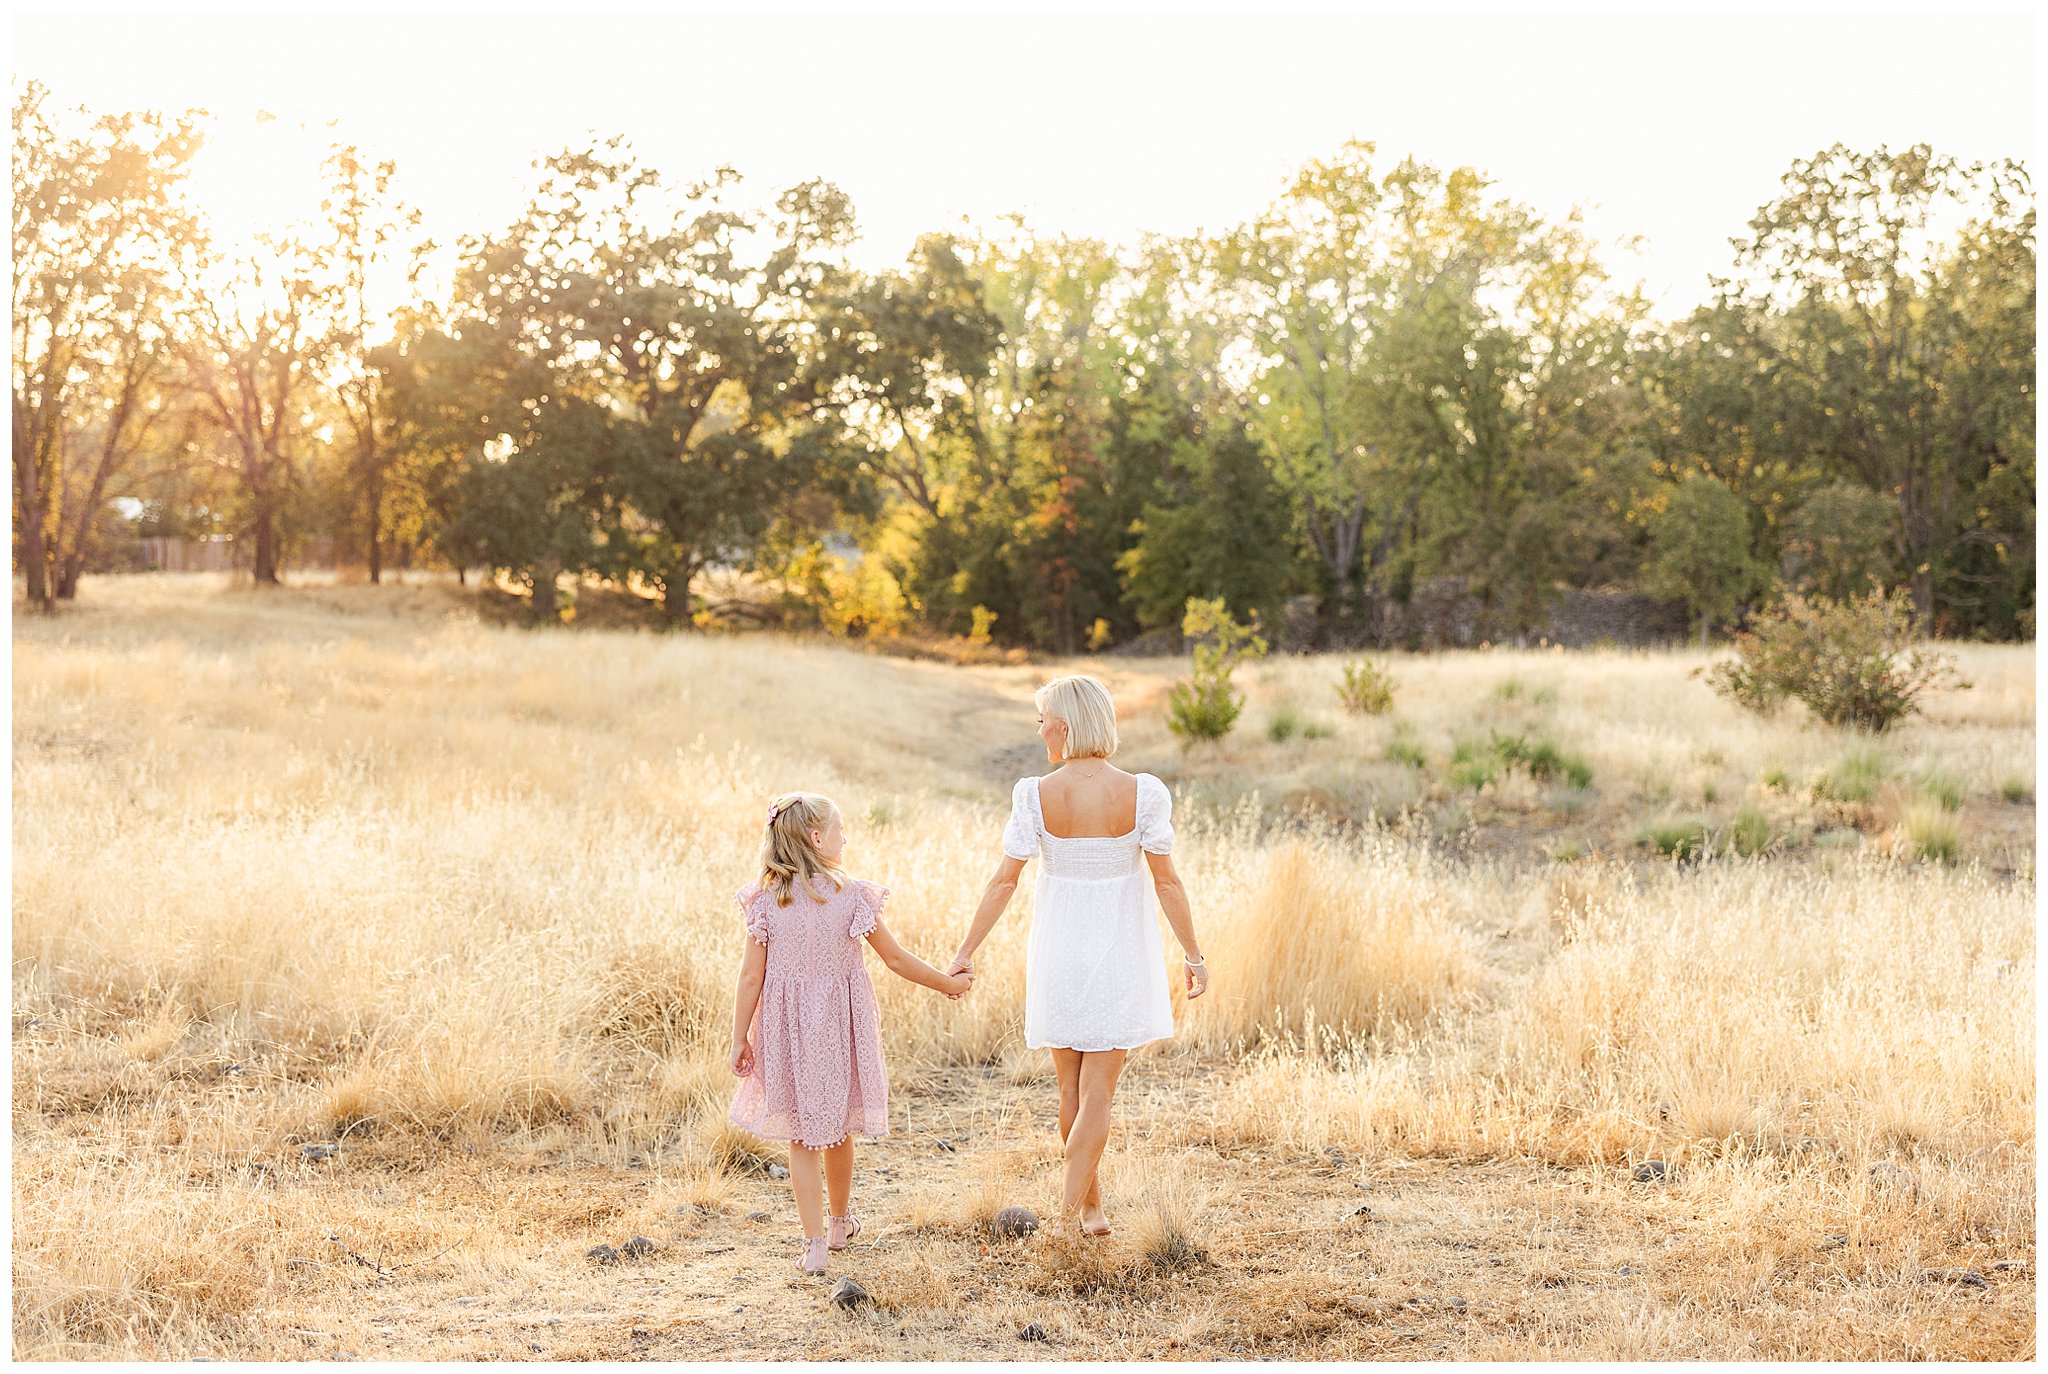 Mother Daughter Family Session Grass Field Chico CA Pink White Pastels Fall September,